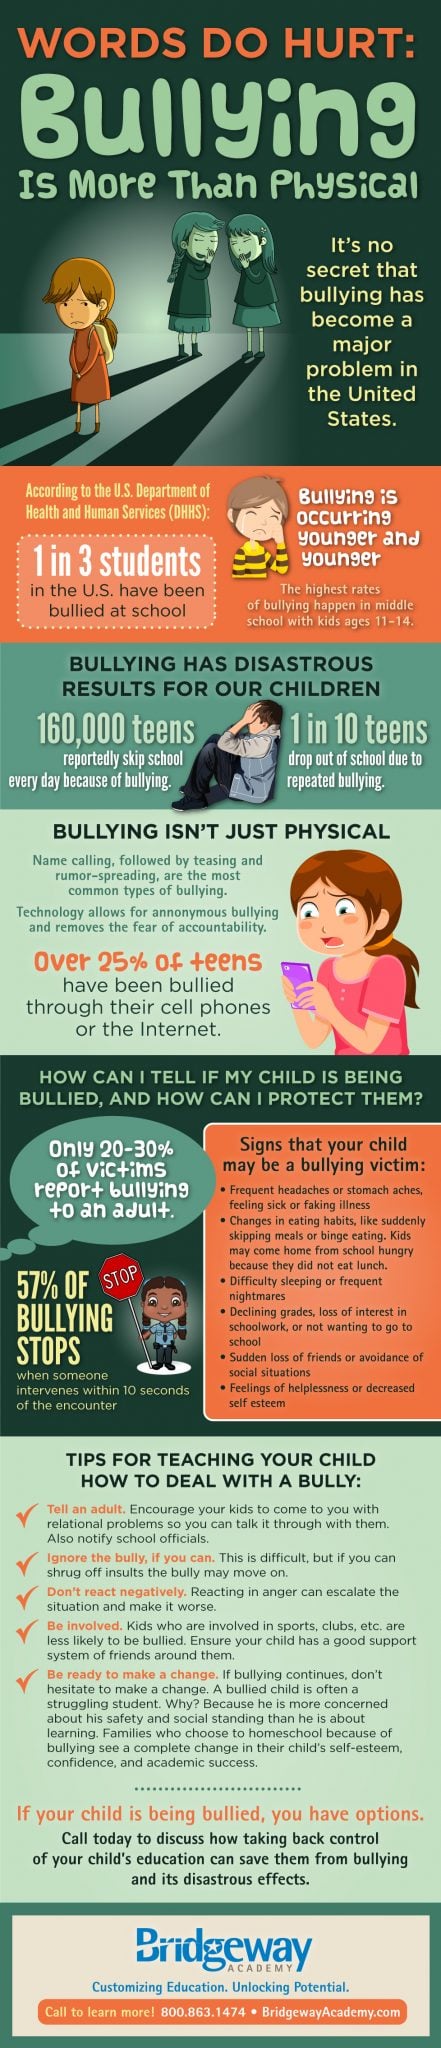 bullying, Bullying is more than physical